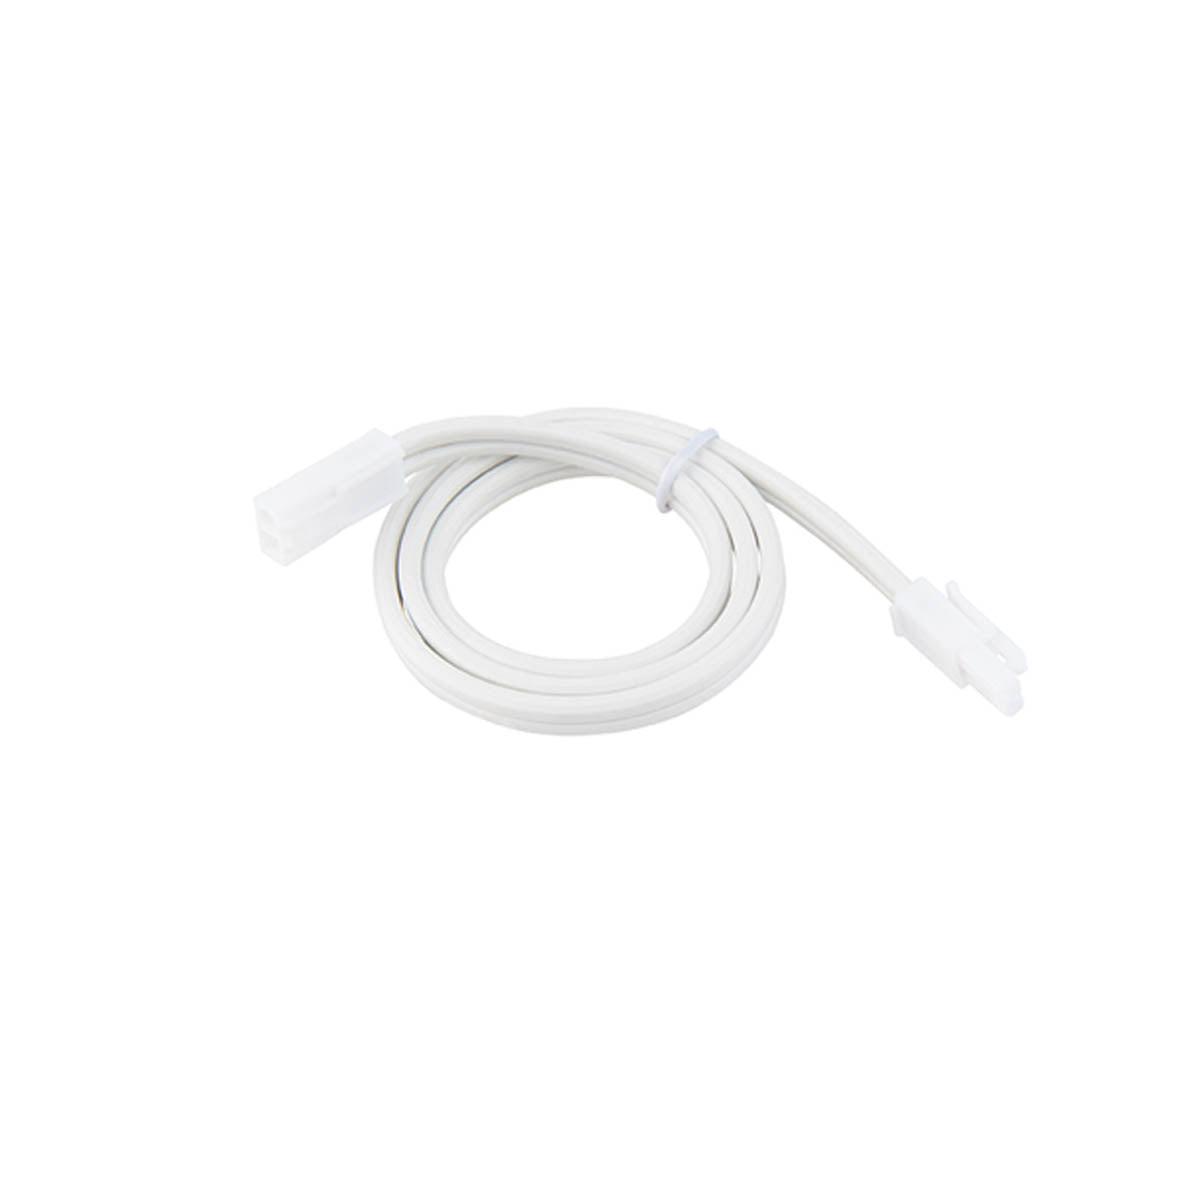 36in. Interconnect Cable for 3-CCT Puck Light, White